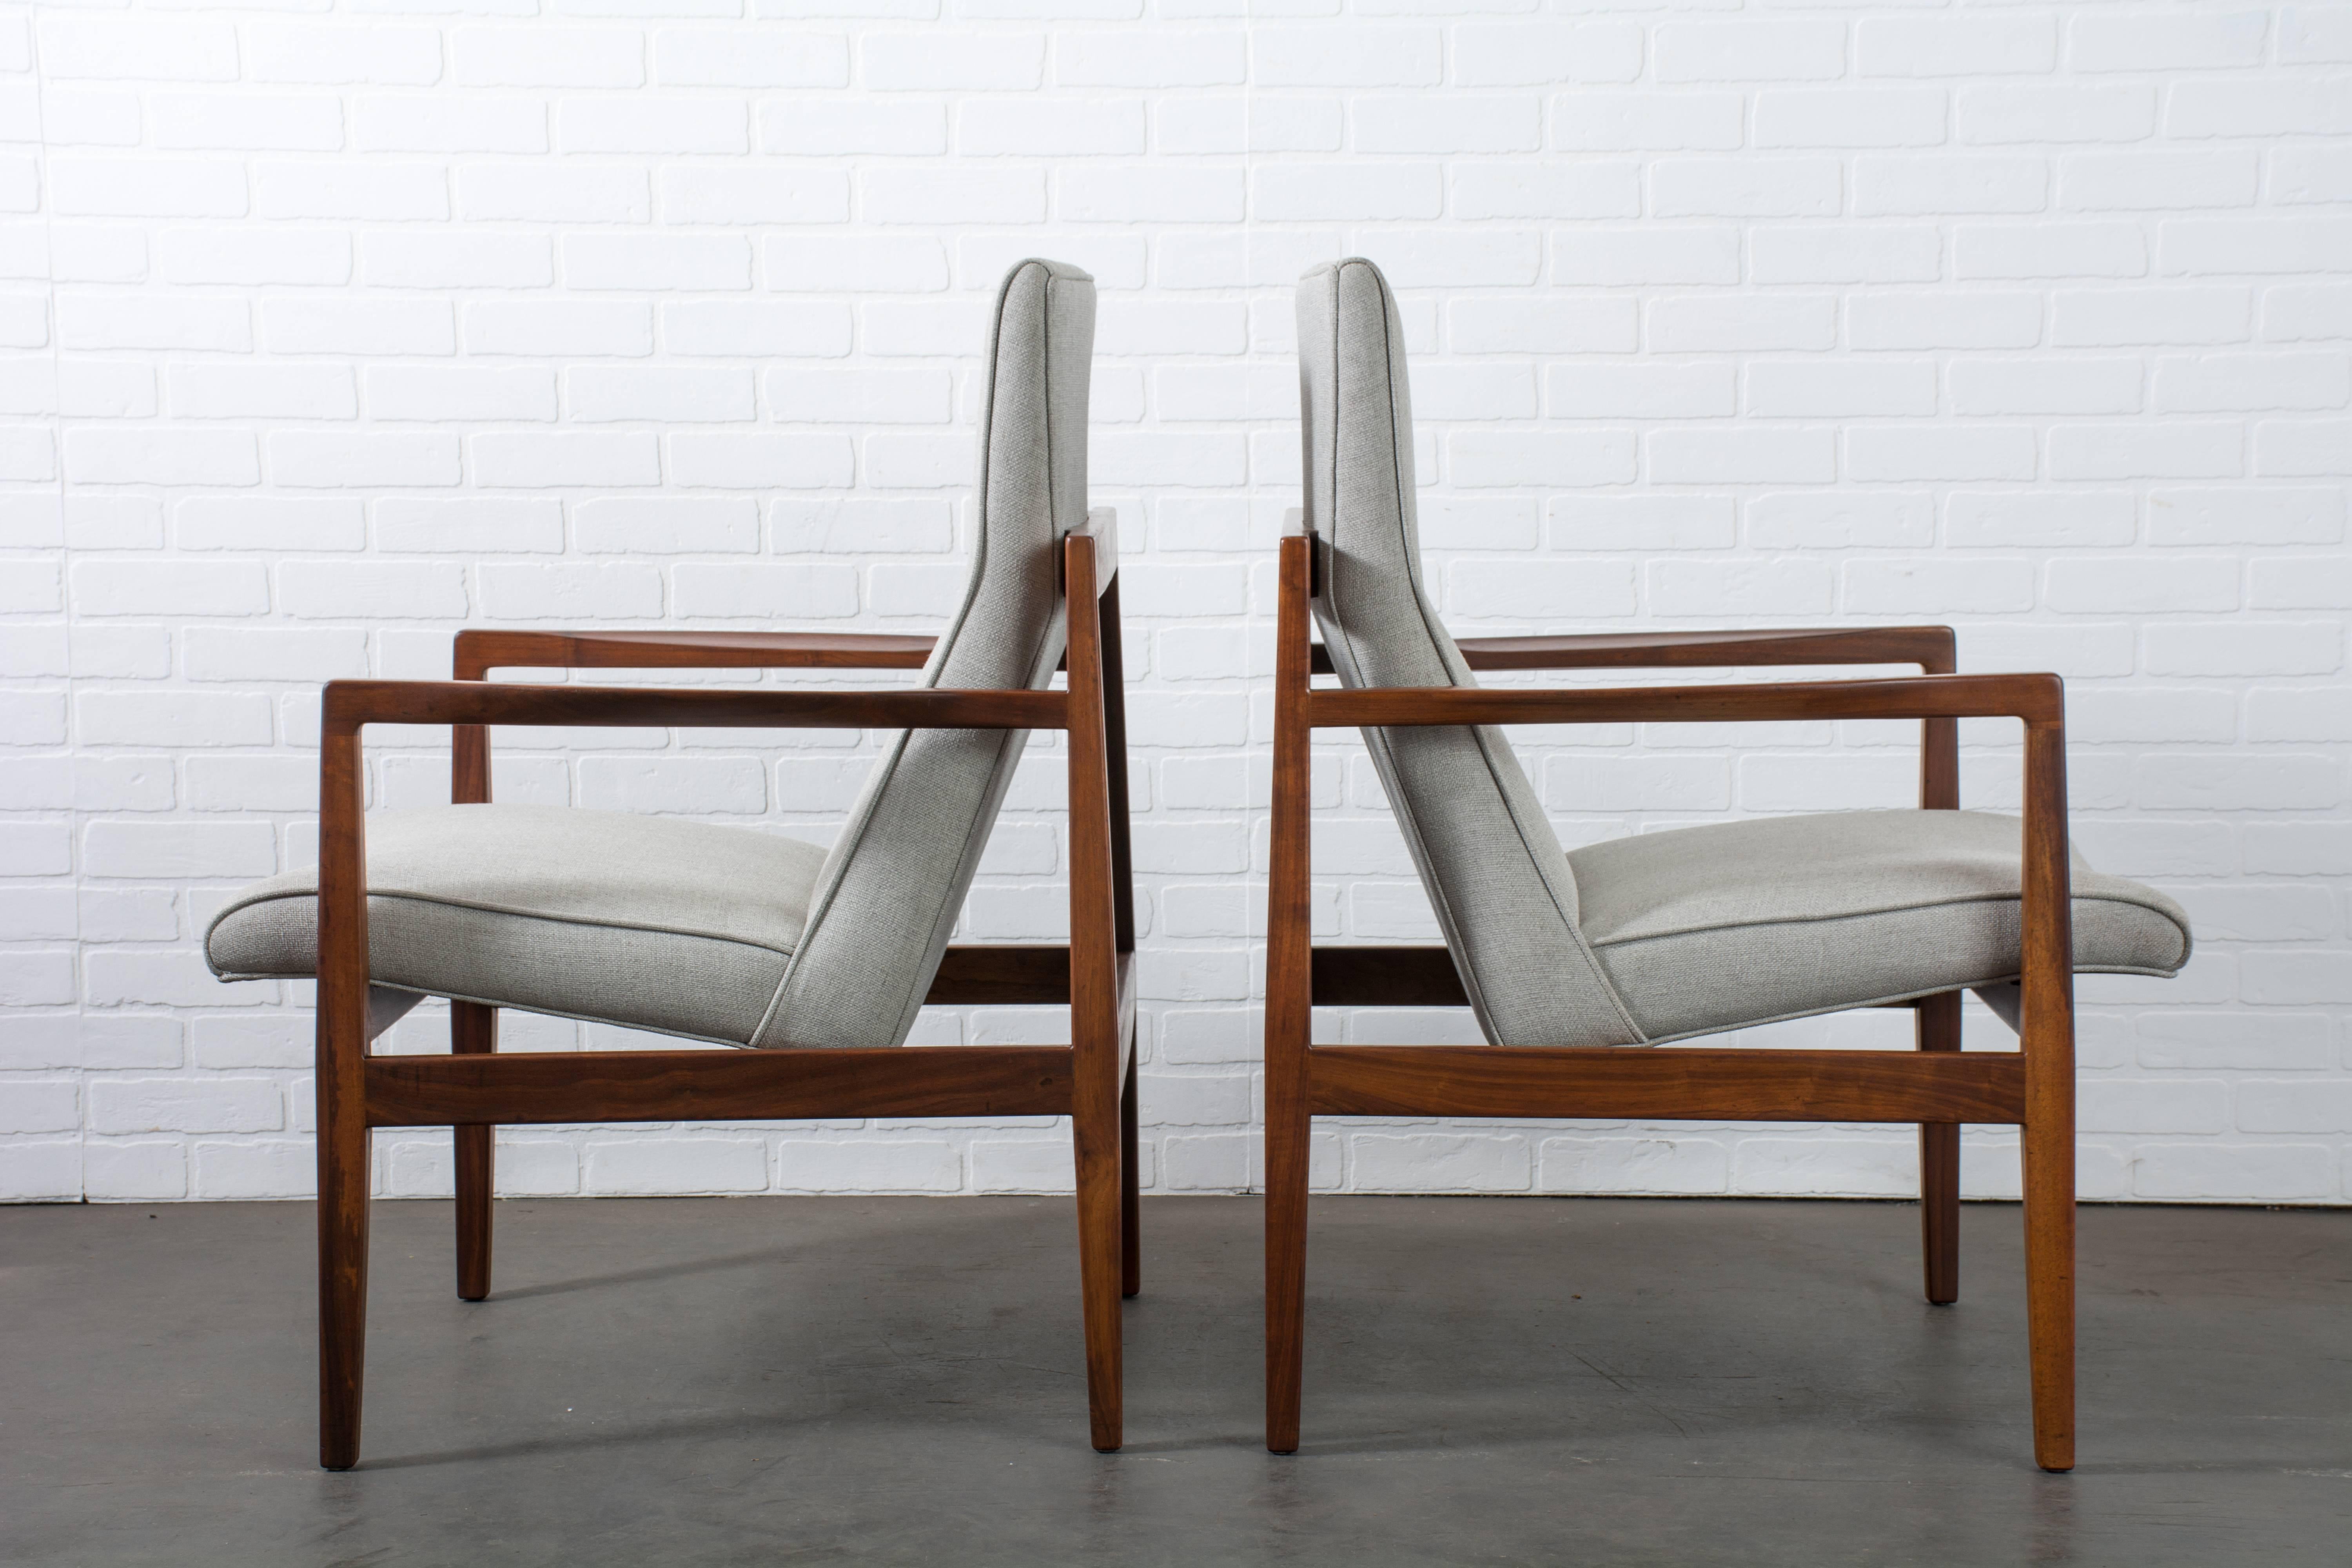 This pair of vintage Mid-Century lounge chairs was designed by Jens Risom for Jens Risom Design, Inc., USA, circa 1960. They feature sculptural walnut frames and floating seats upholstered in a light grey fabric.